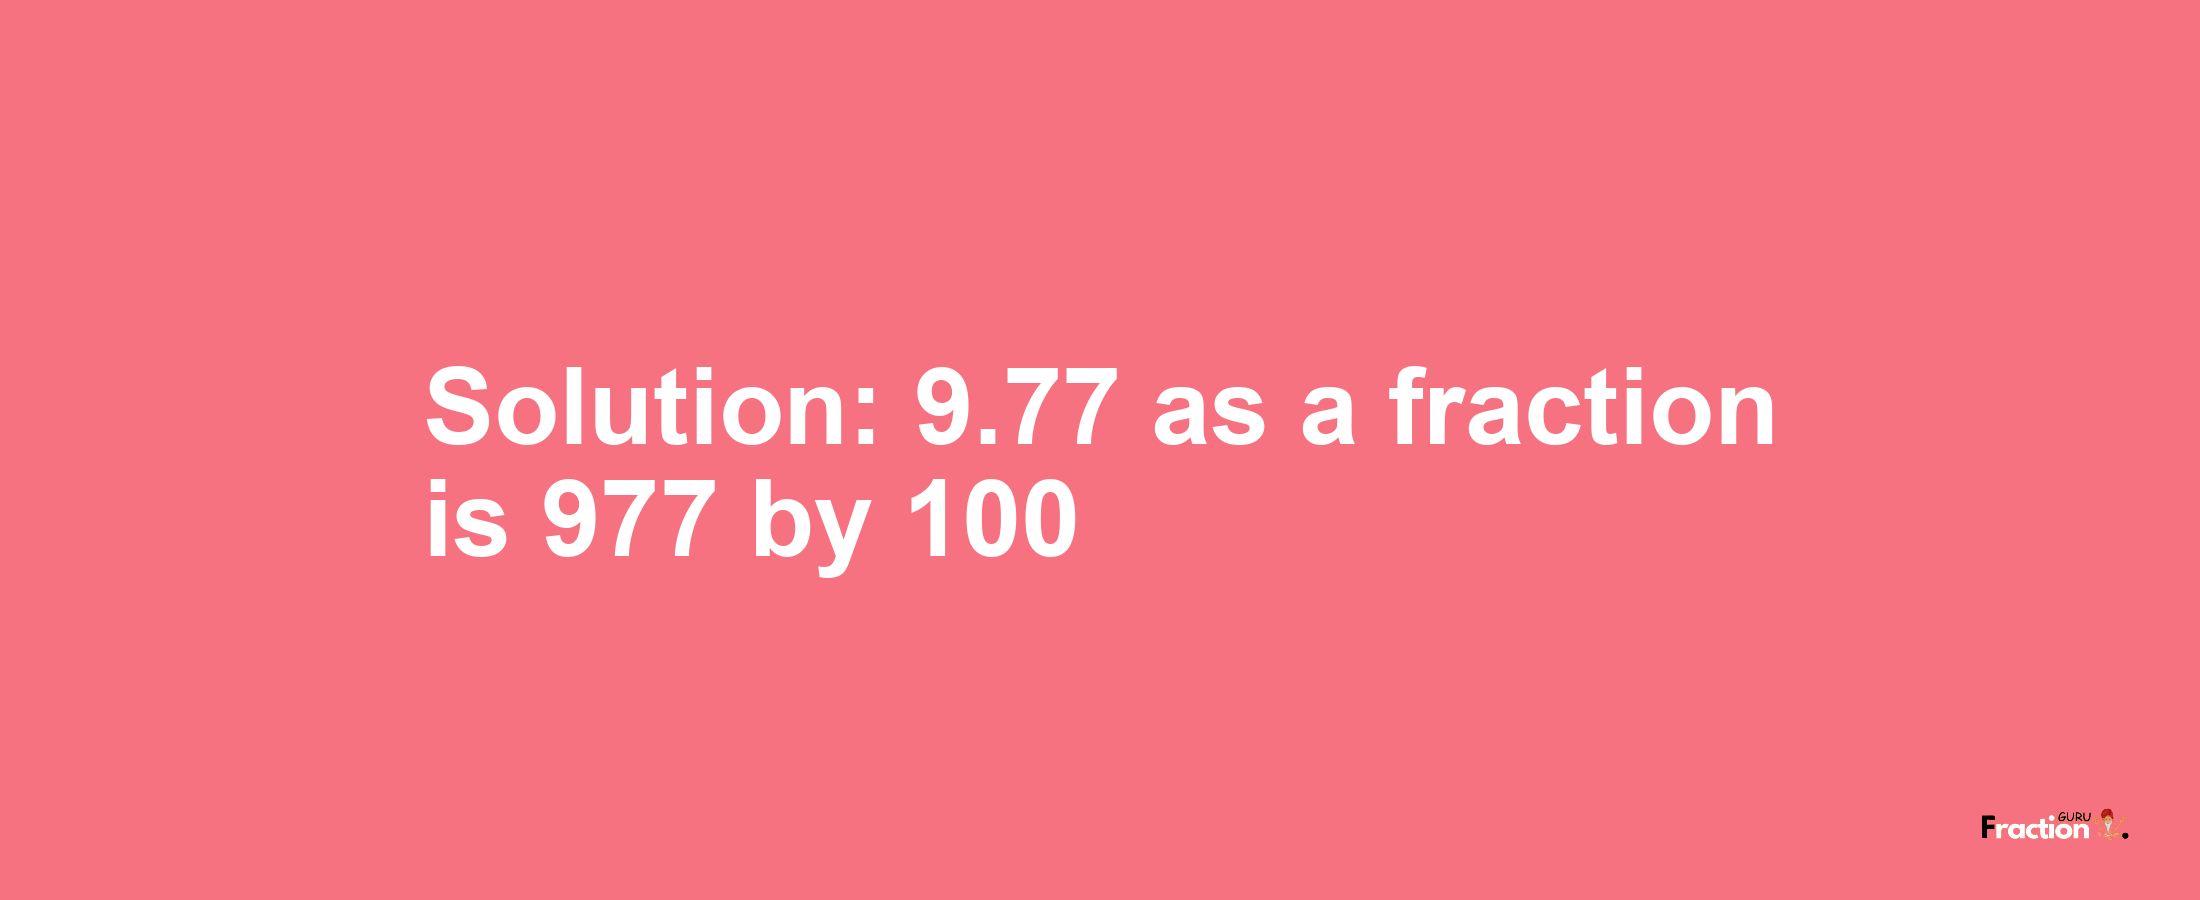 Solution:9.77 as a fraction is 977/100